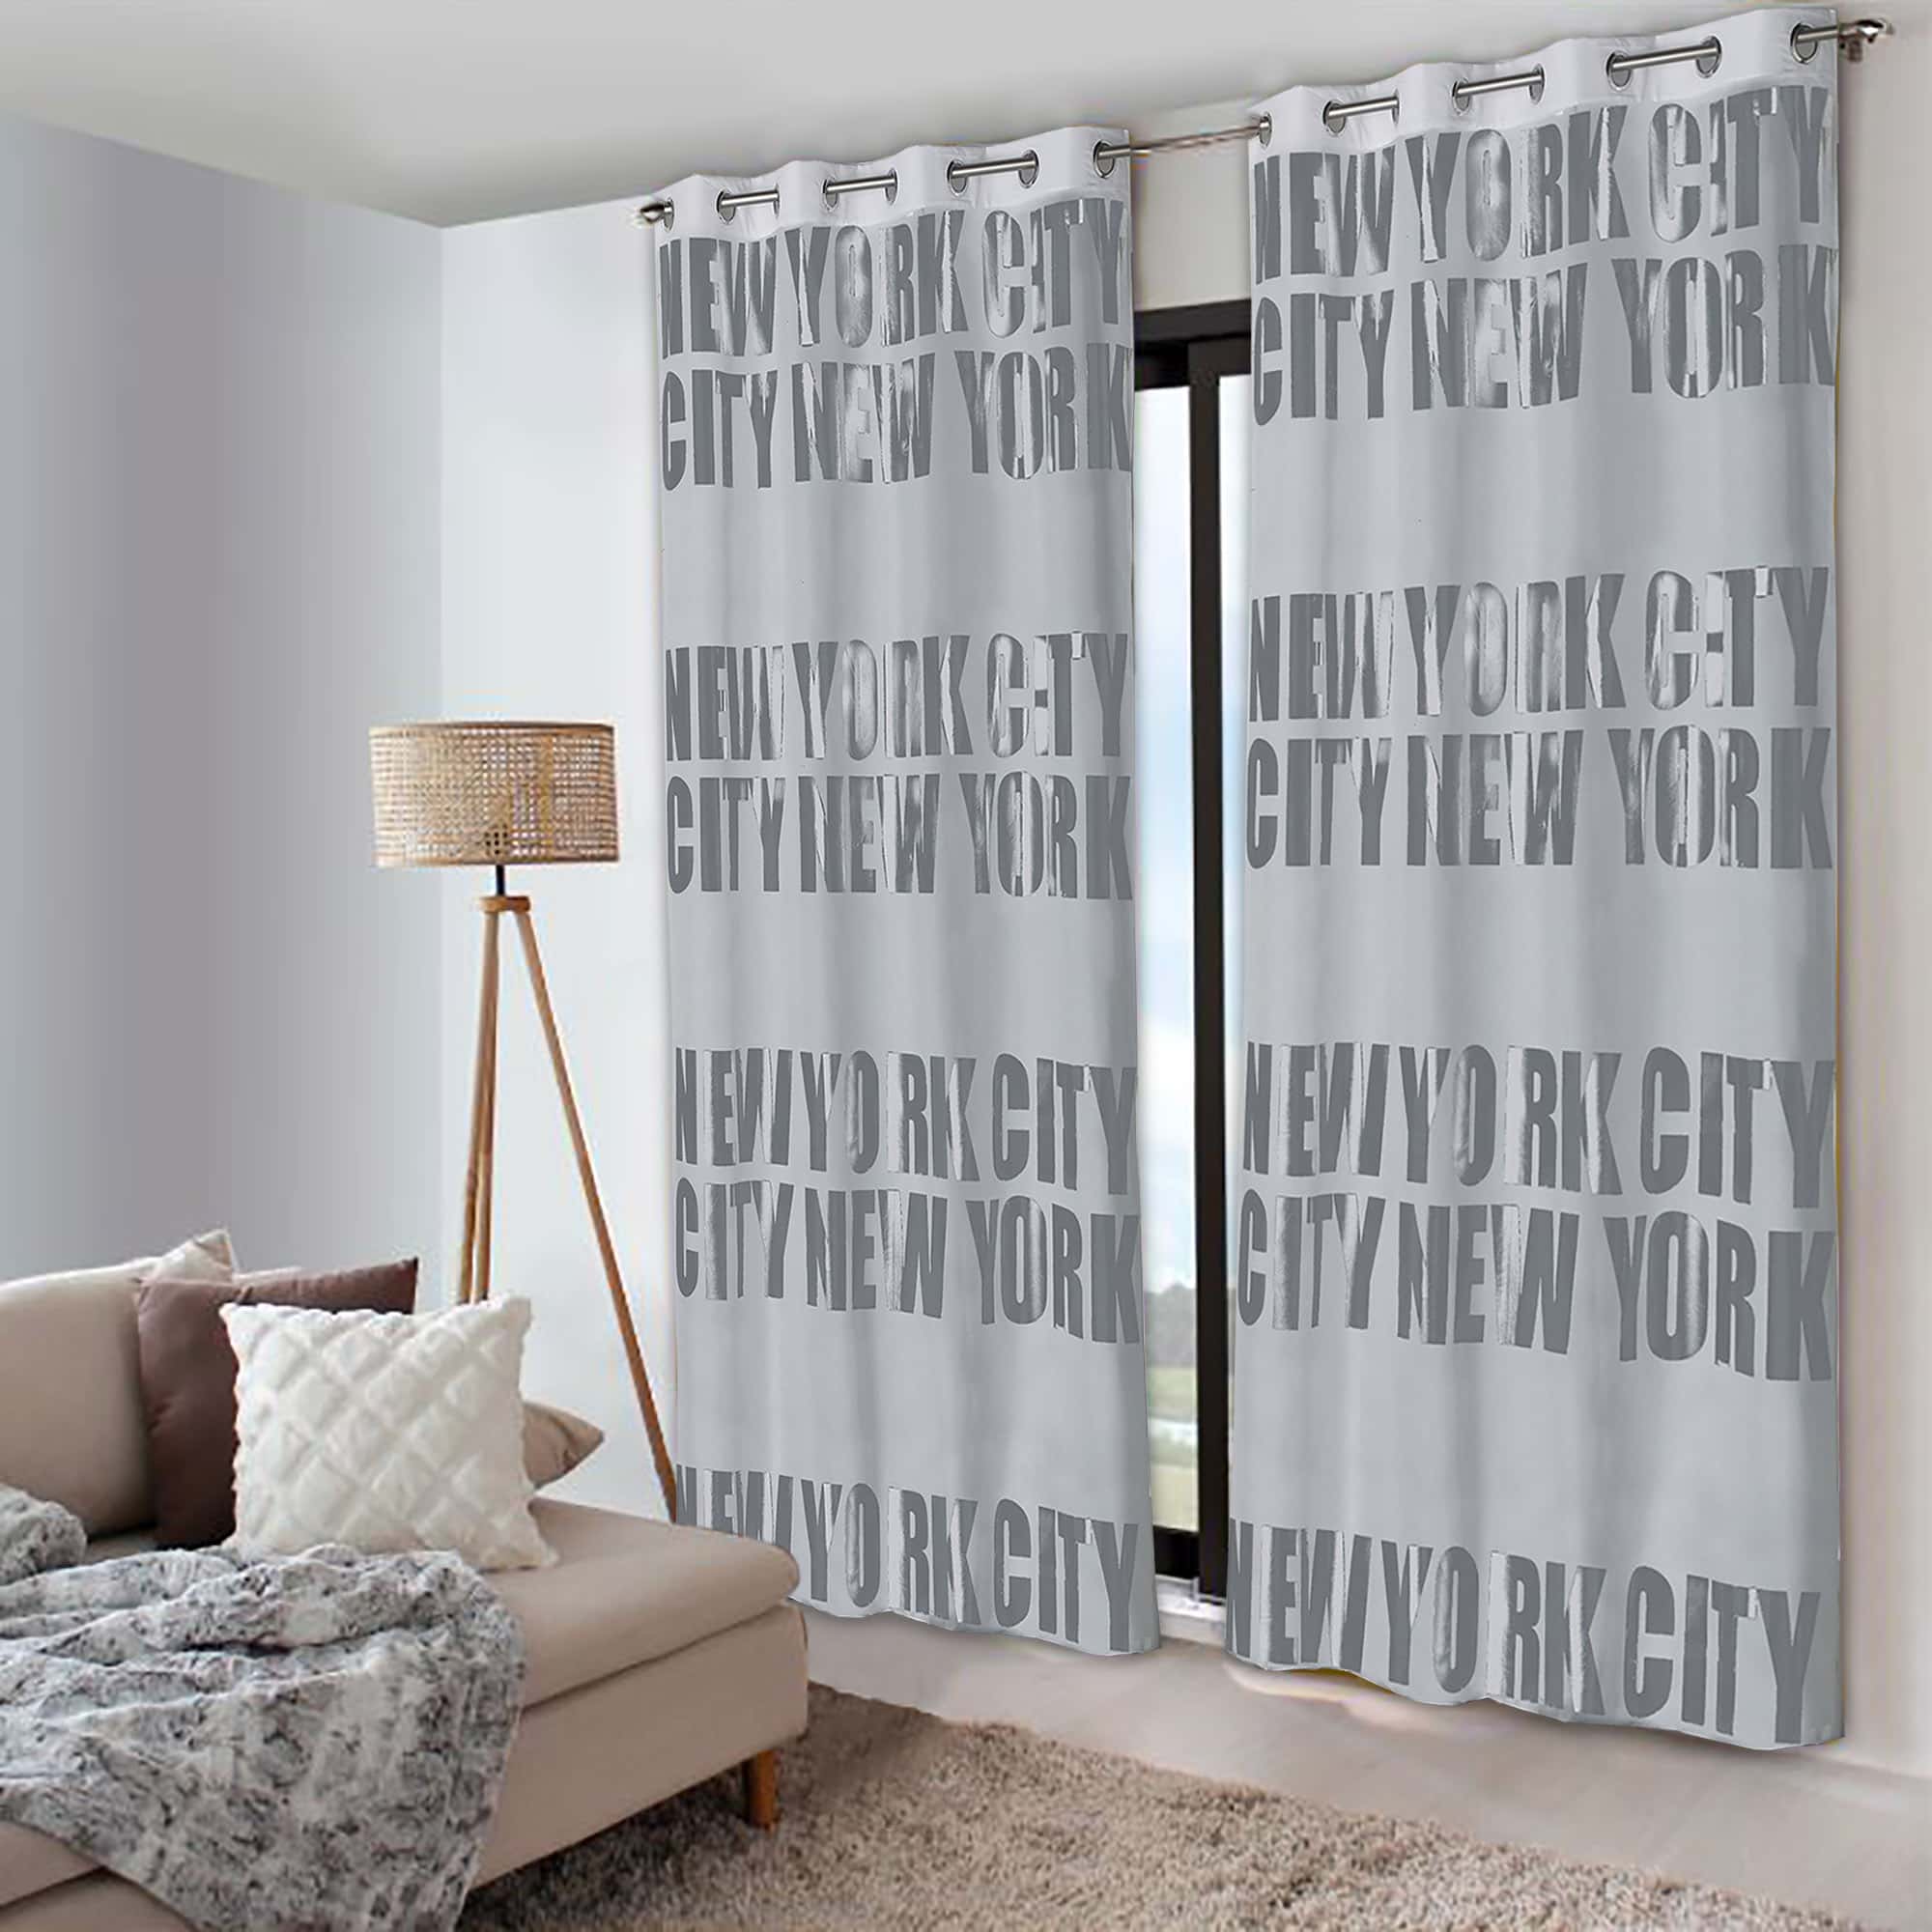 gorgeous drapes in delicate light grey with print for modern interior perfect for teen room bedroom living room office